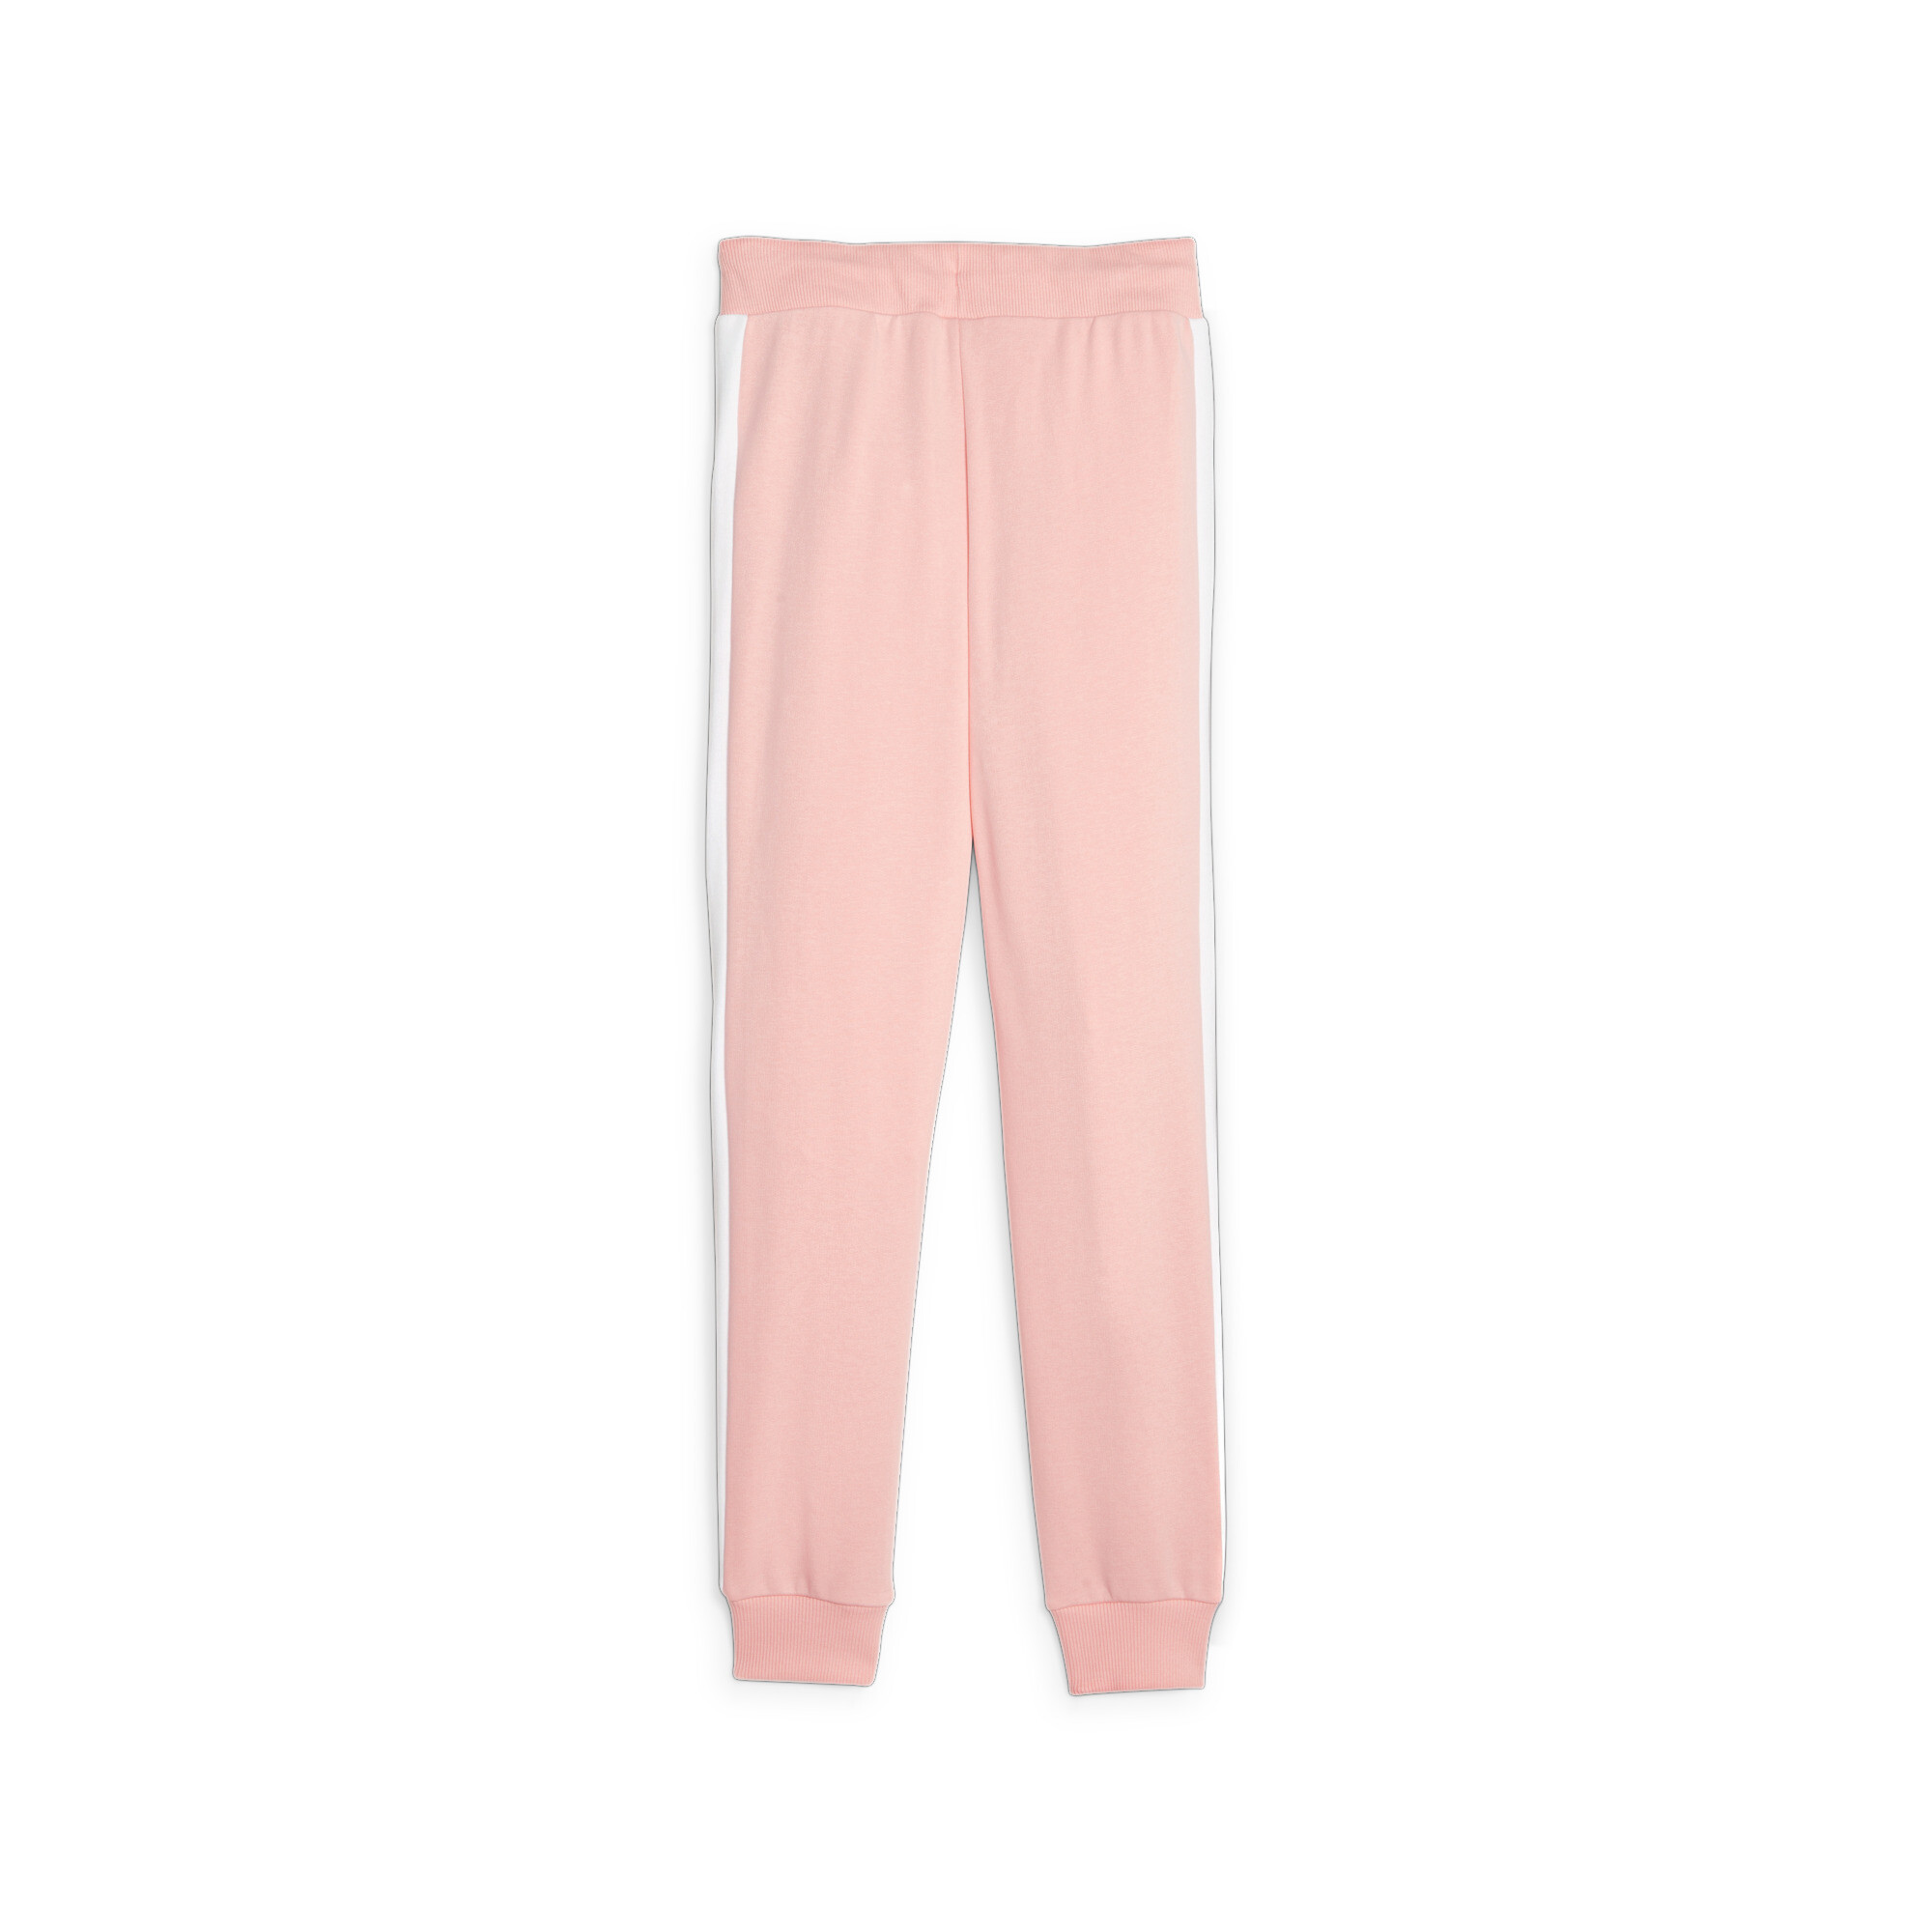 PUMA Classics T7 Track Pants In Pink, Size 11-12 Youth